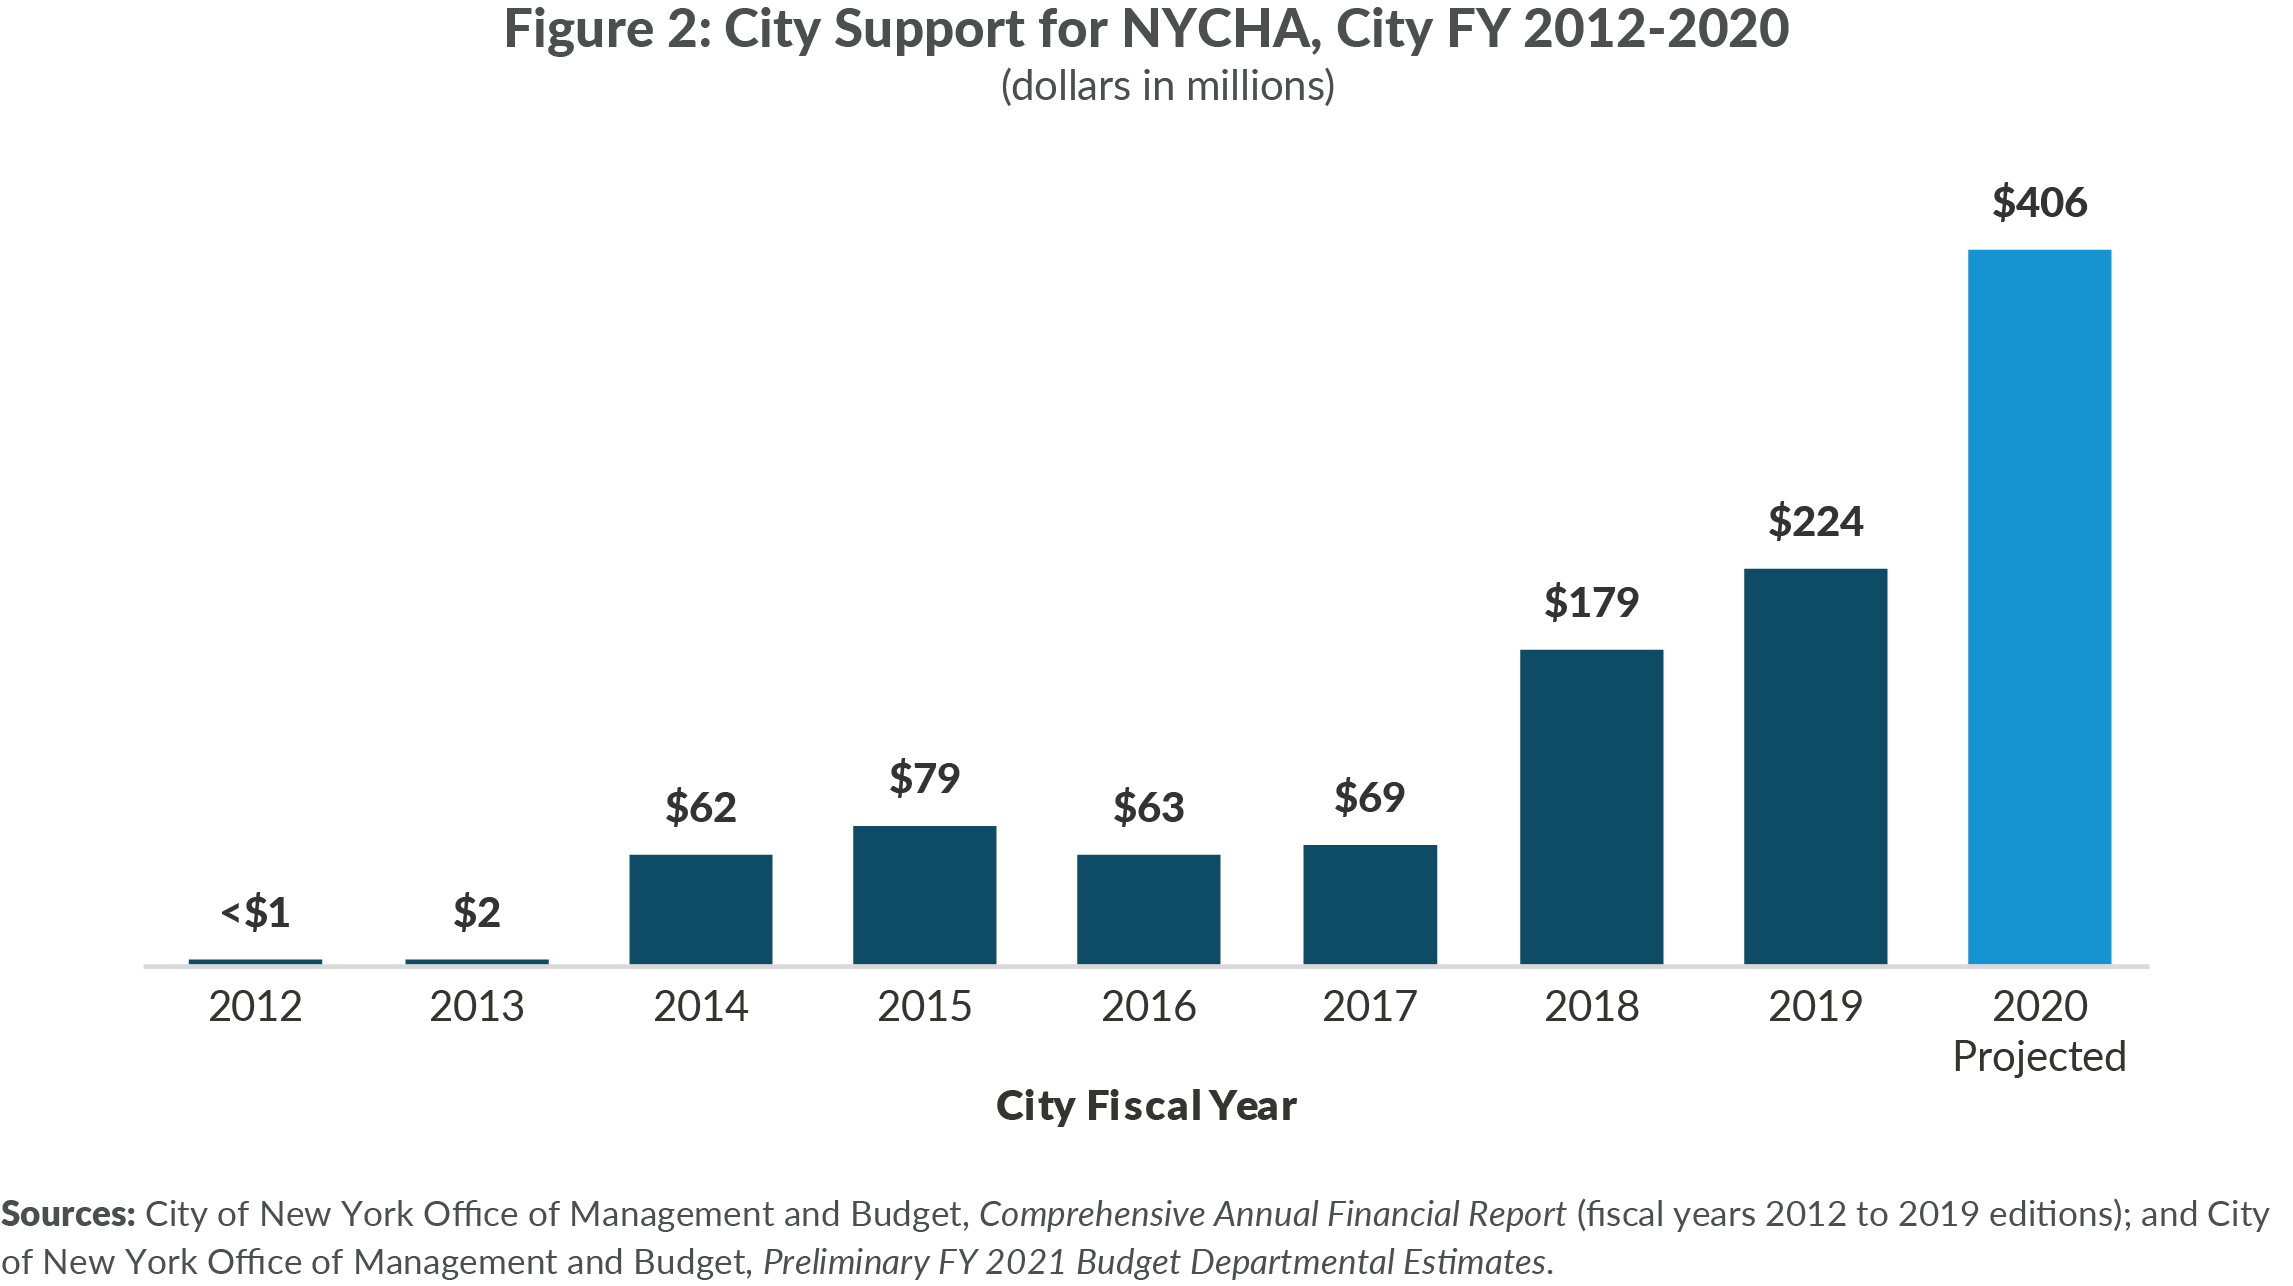 Figure 2. City Support for NYCHA, City FY 2012-2020 (dollars in millions)